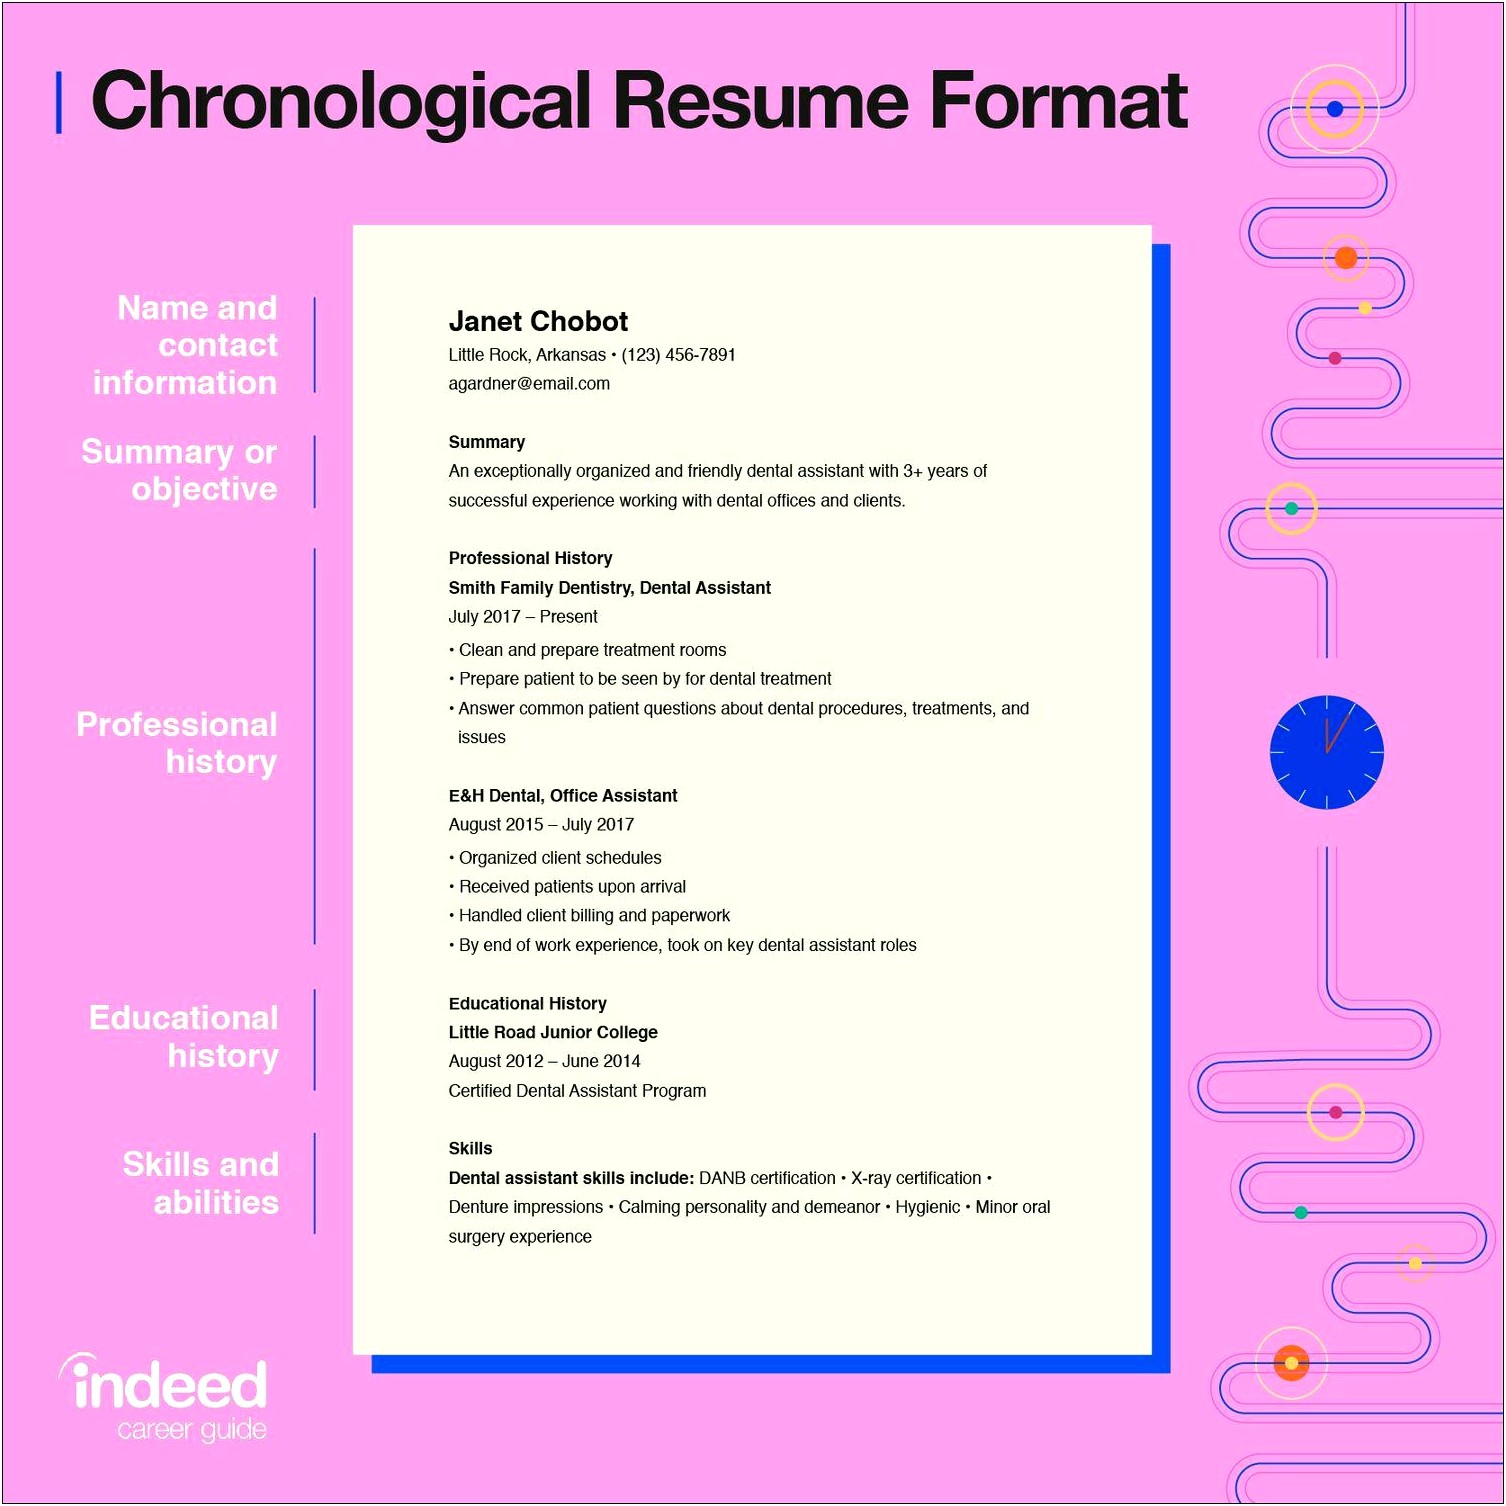 Making A Resume With Only One Job